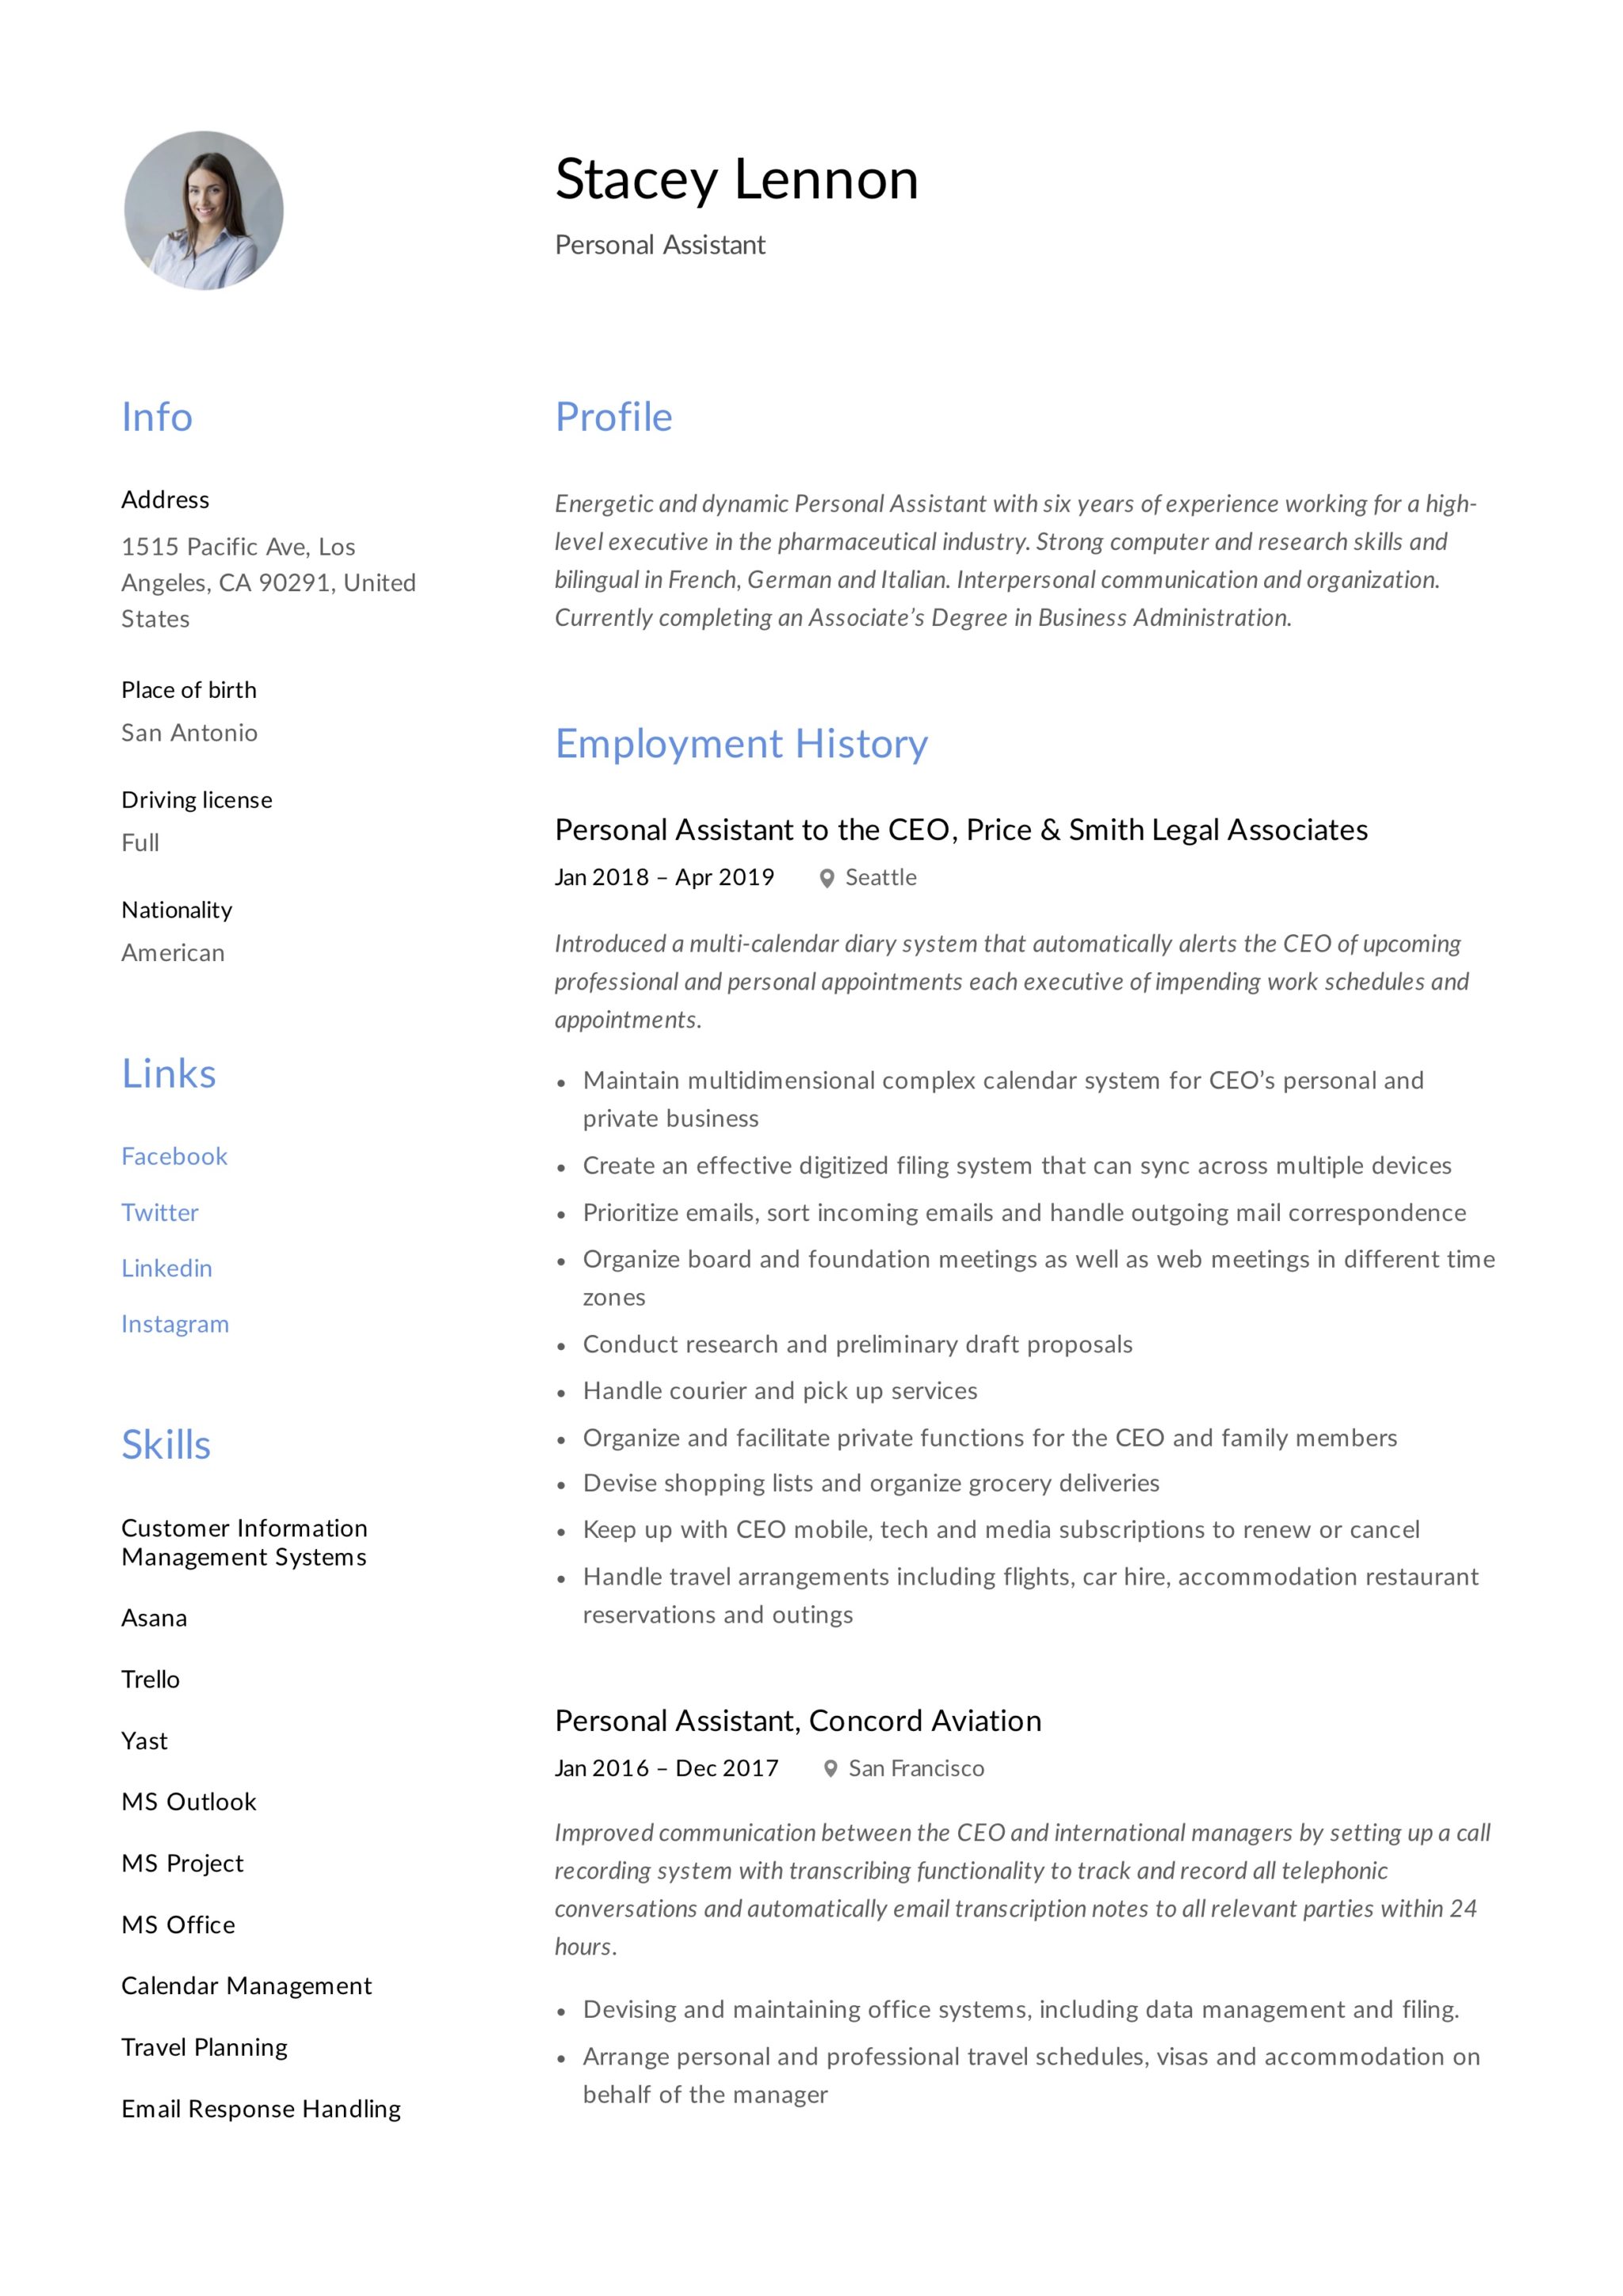 Resume – Personal Assistant (8)